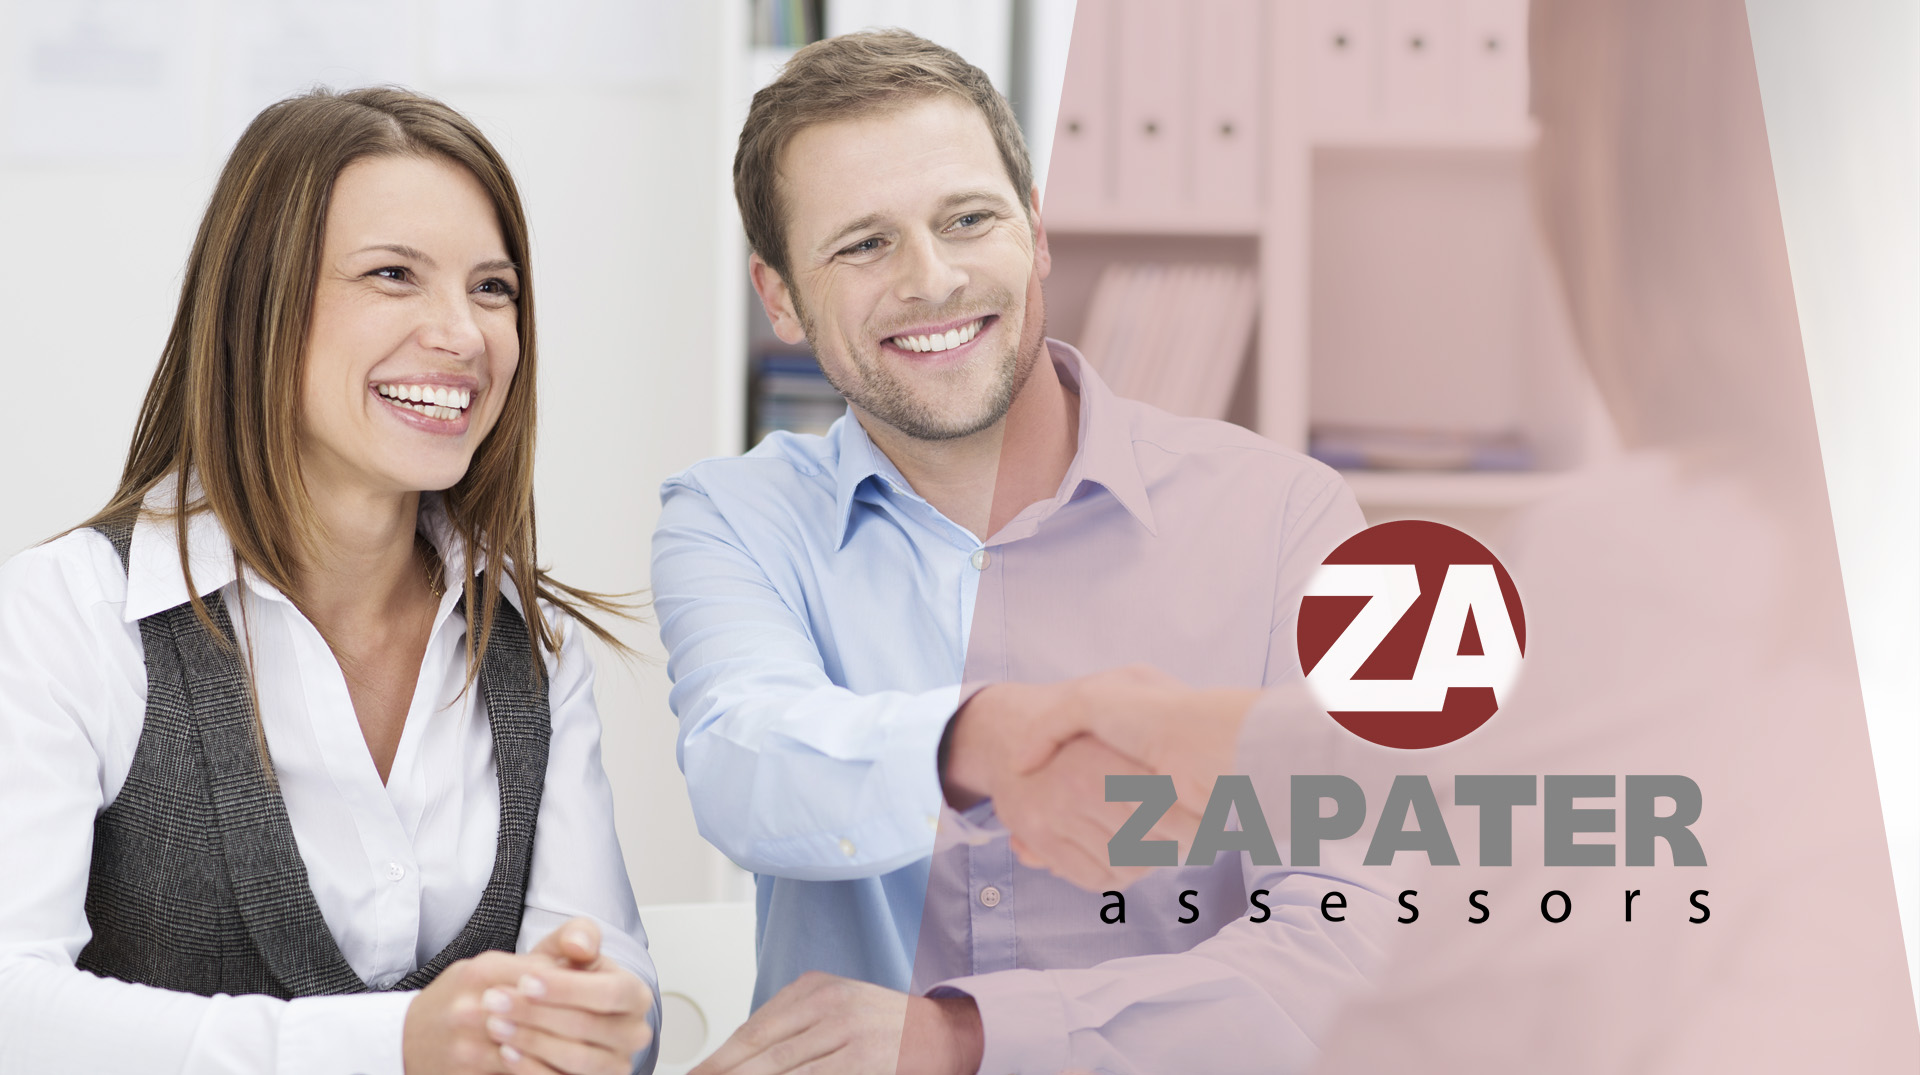 ZAPATER ASSESSORS - Assessoria Fiscal, Laboral , Comptable i Mercantil